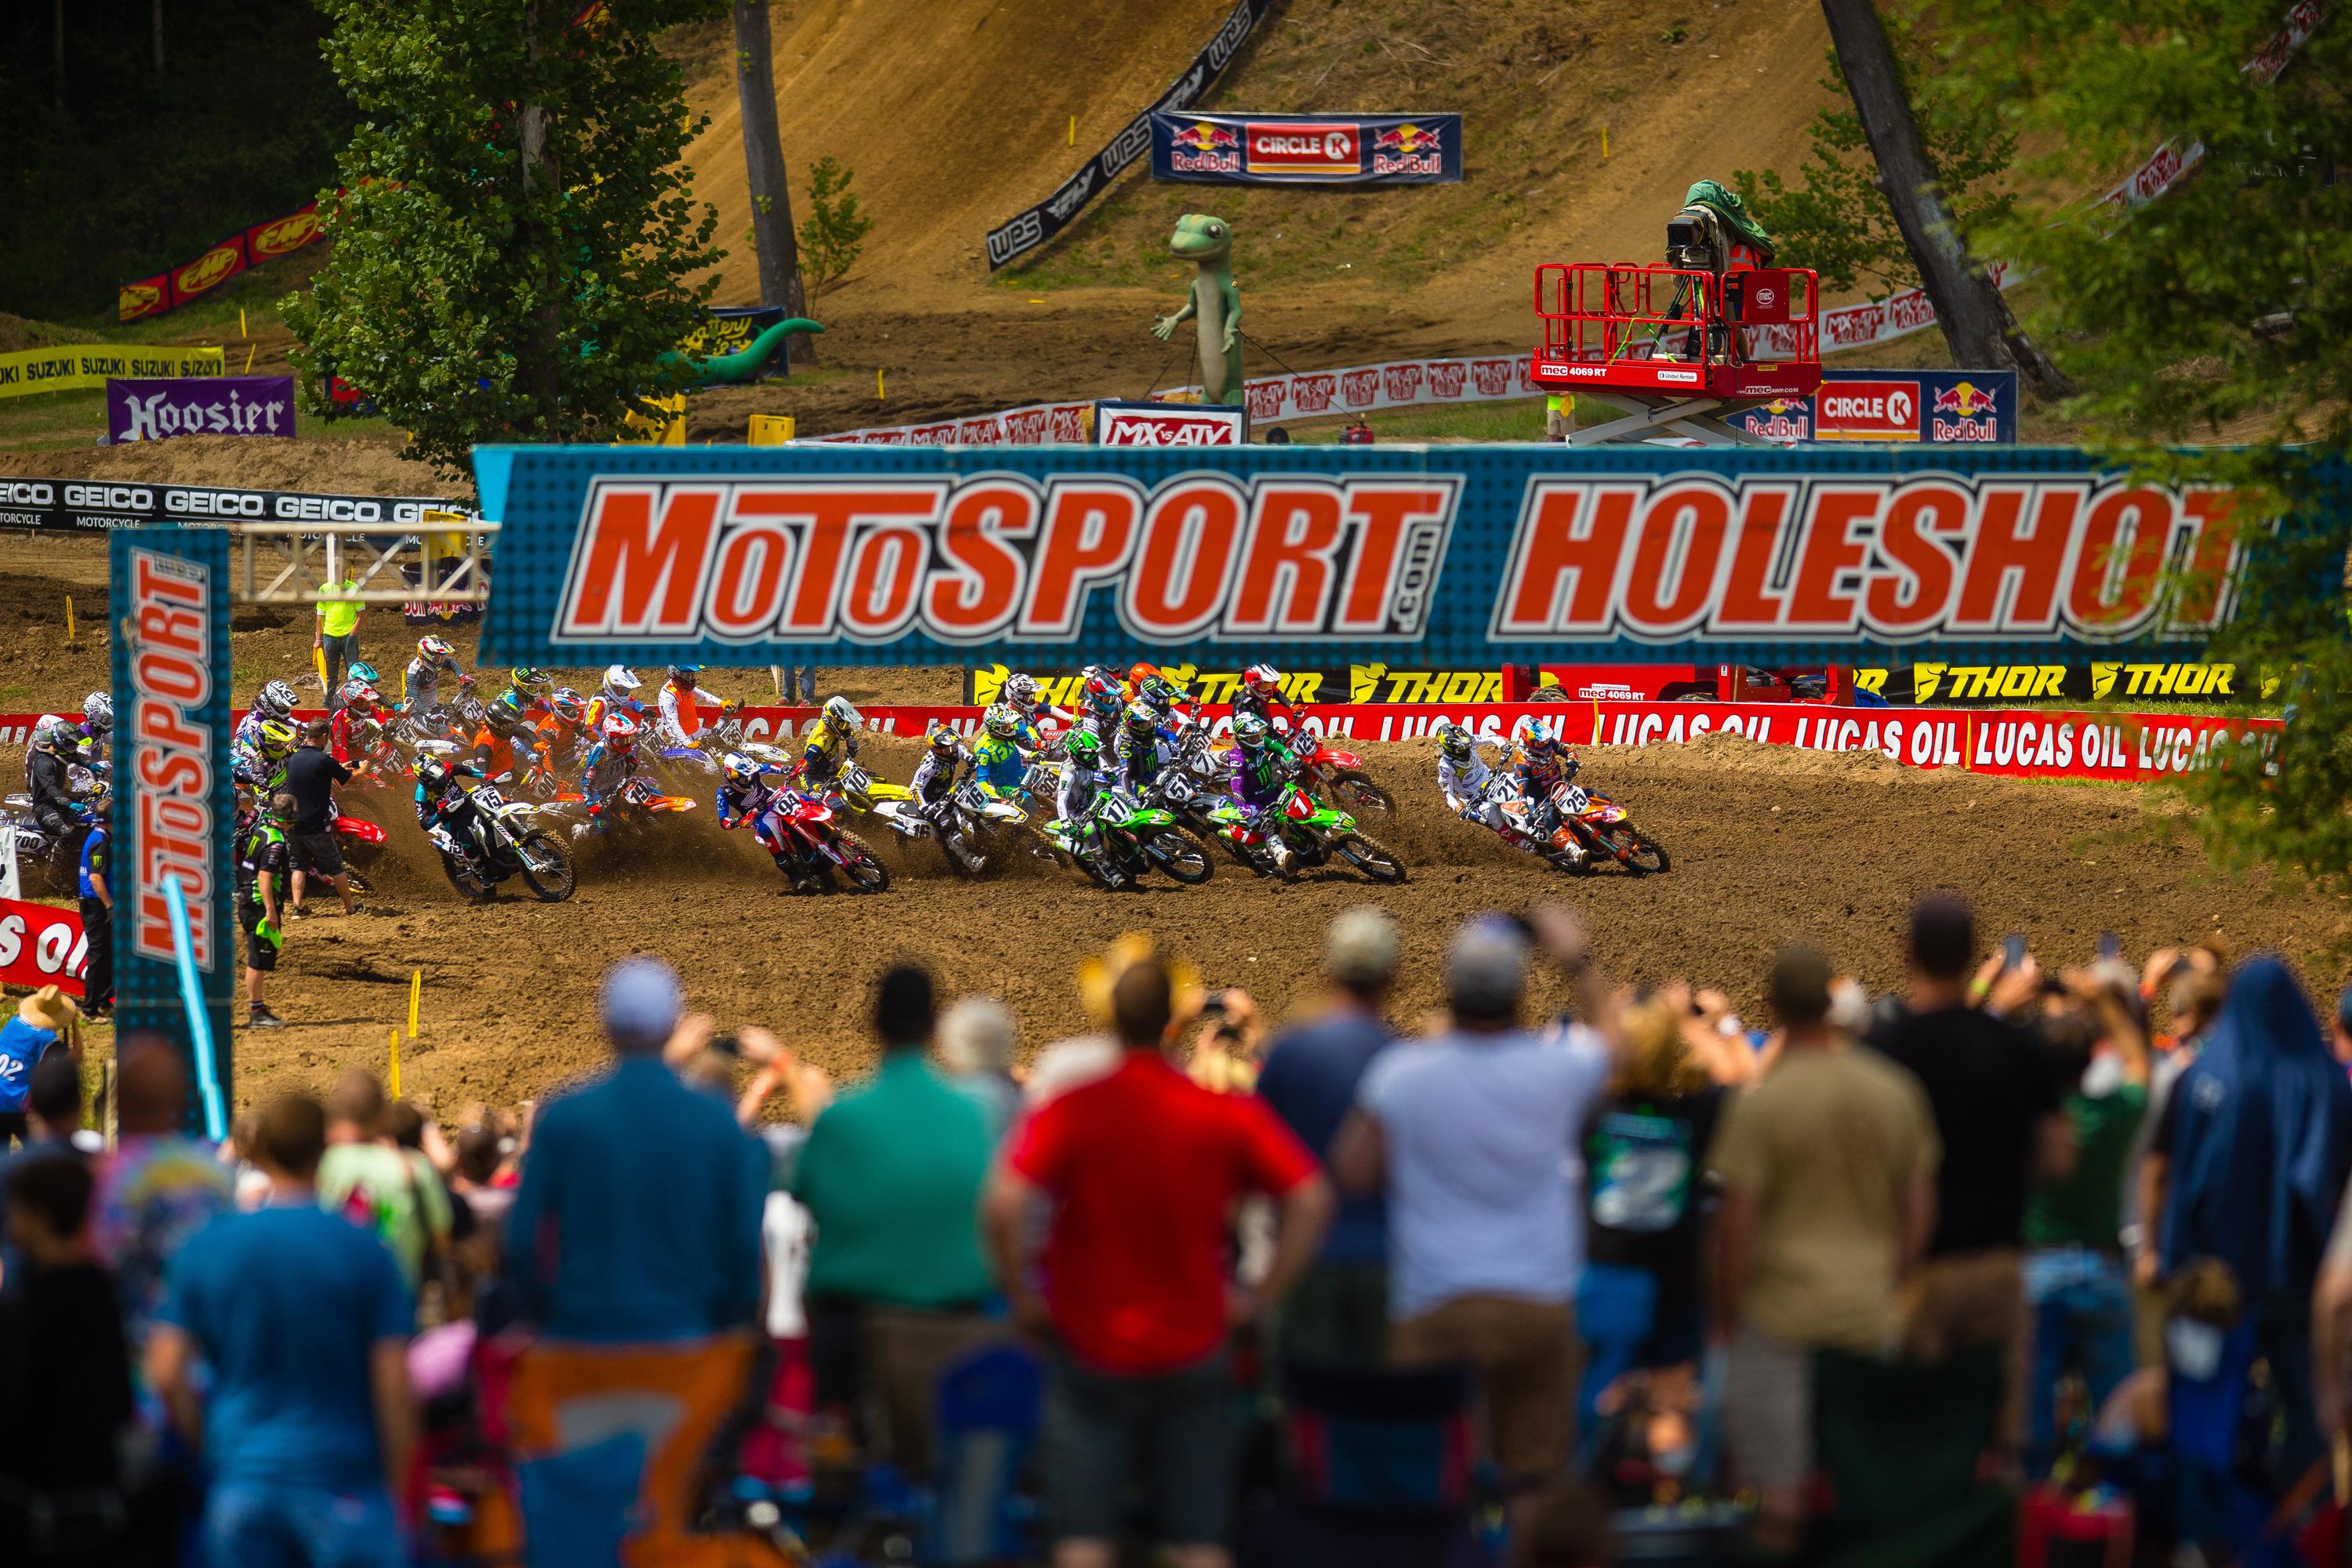 RLT Competition Bulletin 2020-12: Update to Pro Motocross, GNCC and ATVMX Schedules